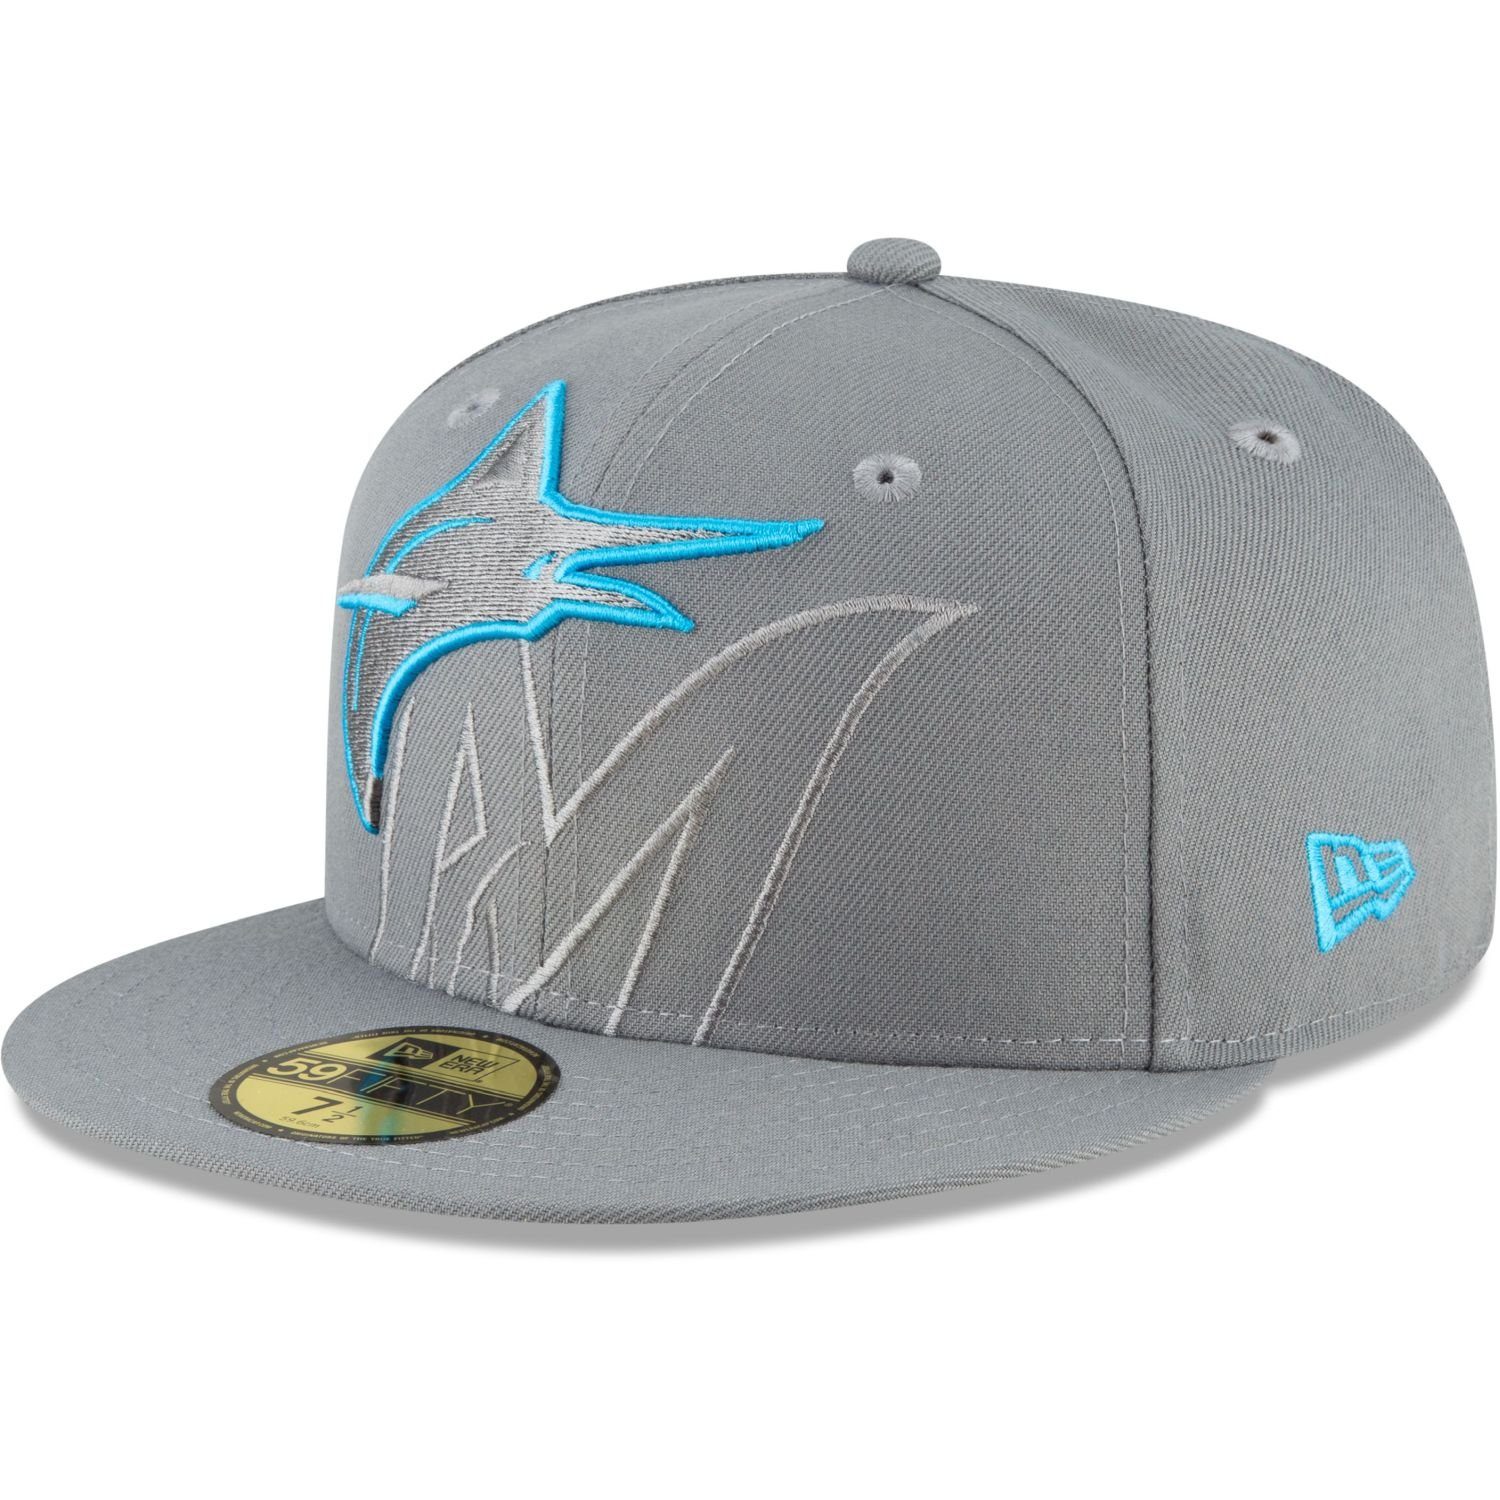 New Era Fitted Cap 59Fifty STORM GREY MLB Cooperstown Team Miami Marlins